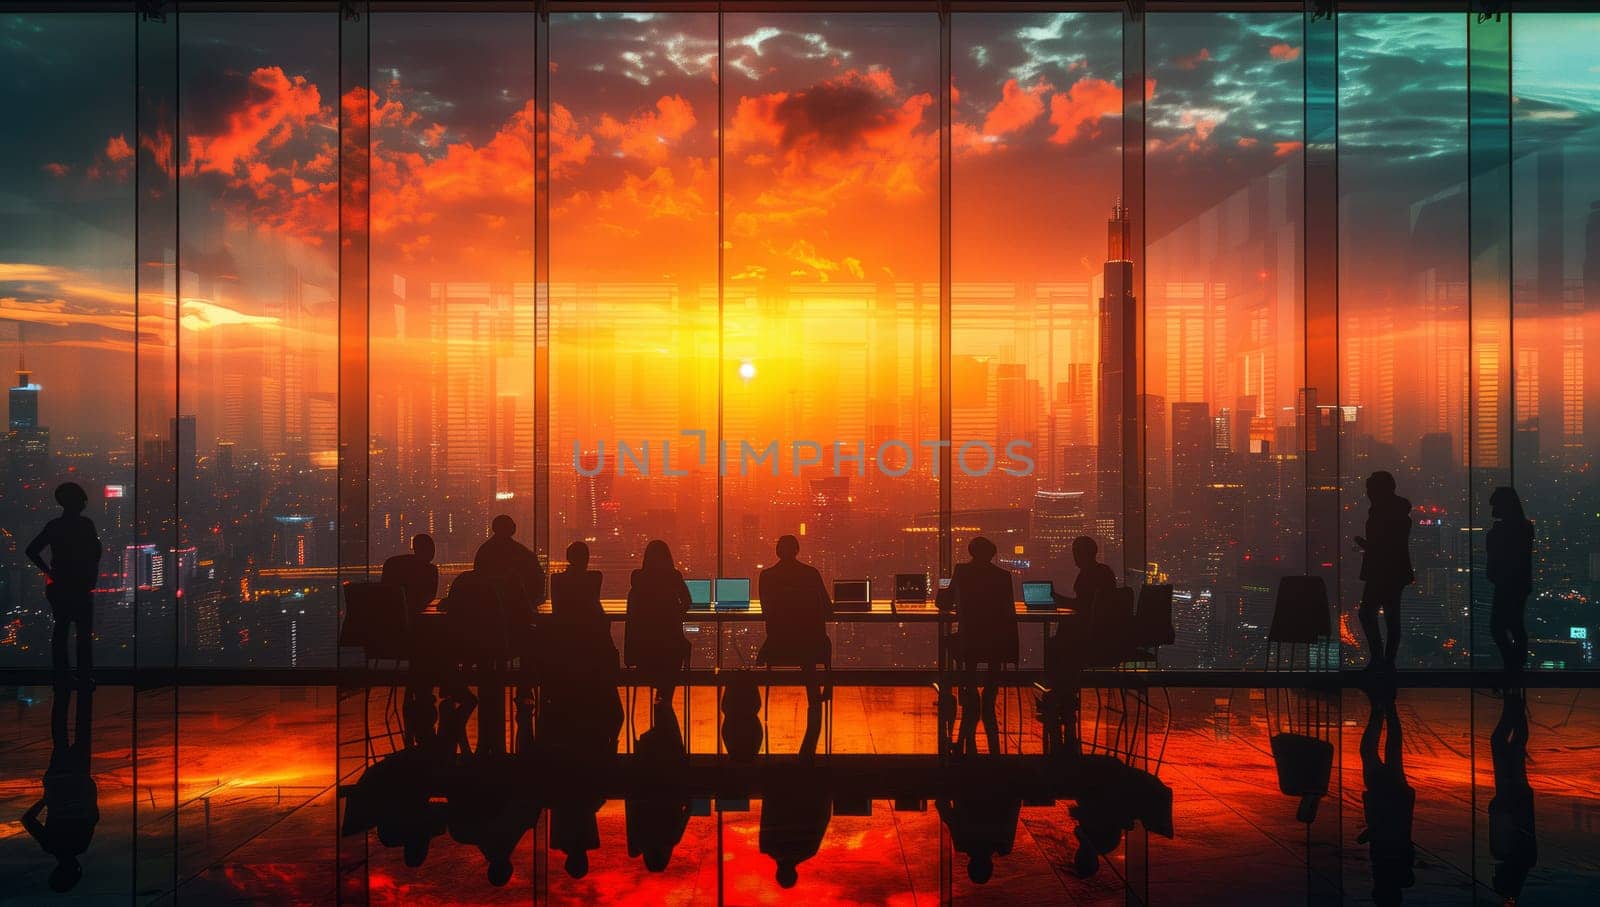 A group of people are enjoying the afterglow of the sunset while standing in front of a window, with the natural landscape and building silhouetted against the colorful sky